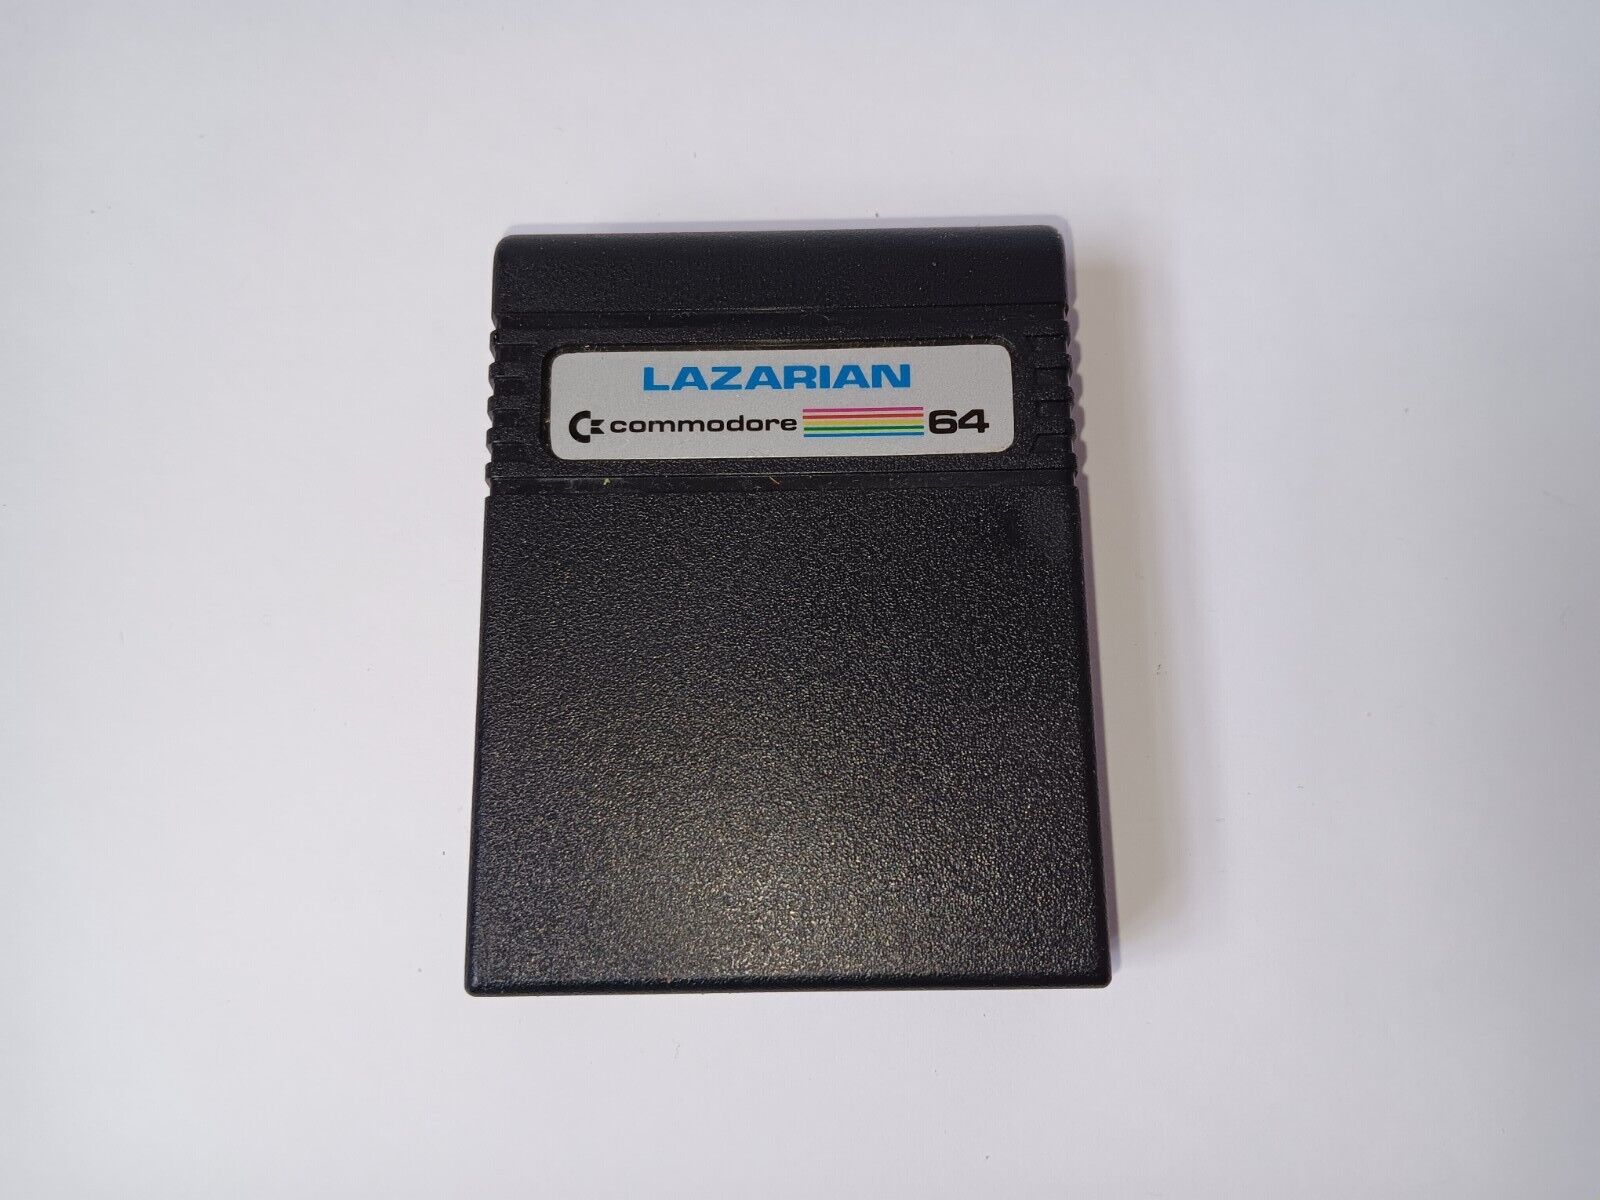 VTG Commodore 64 Lazarian Computer Game Cartridge Tested/Works